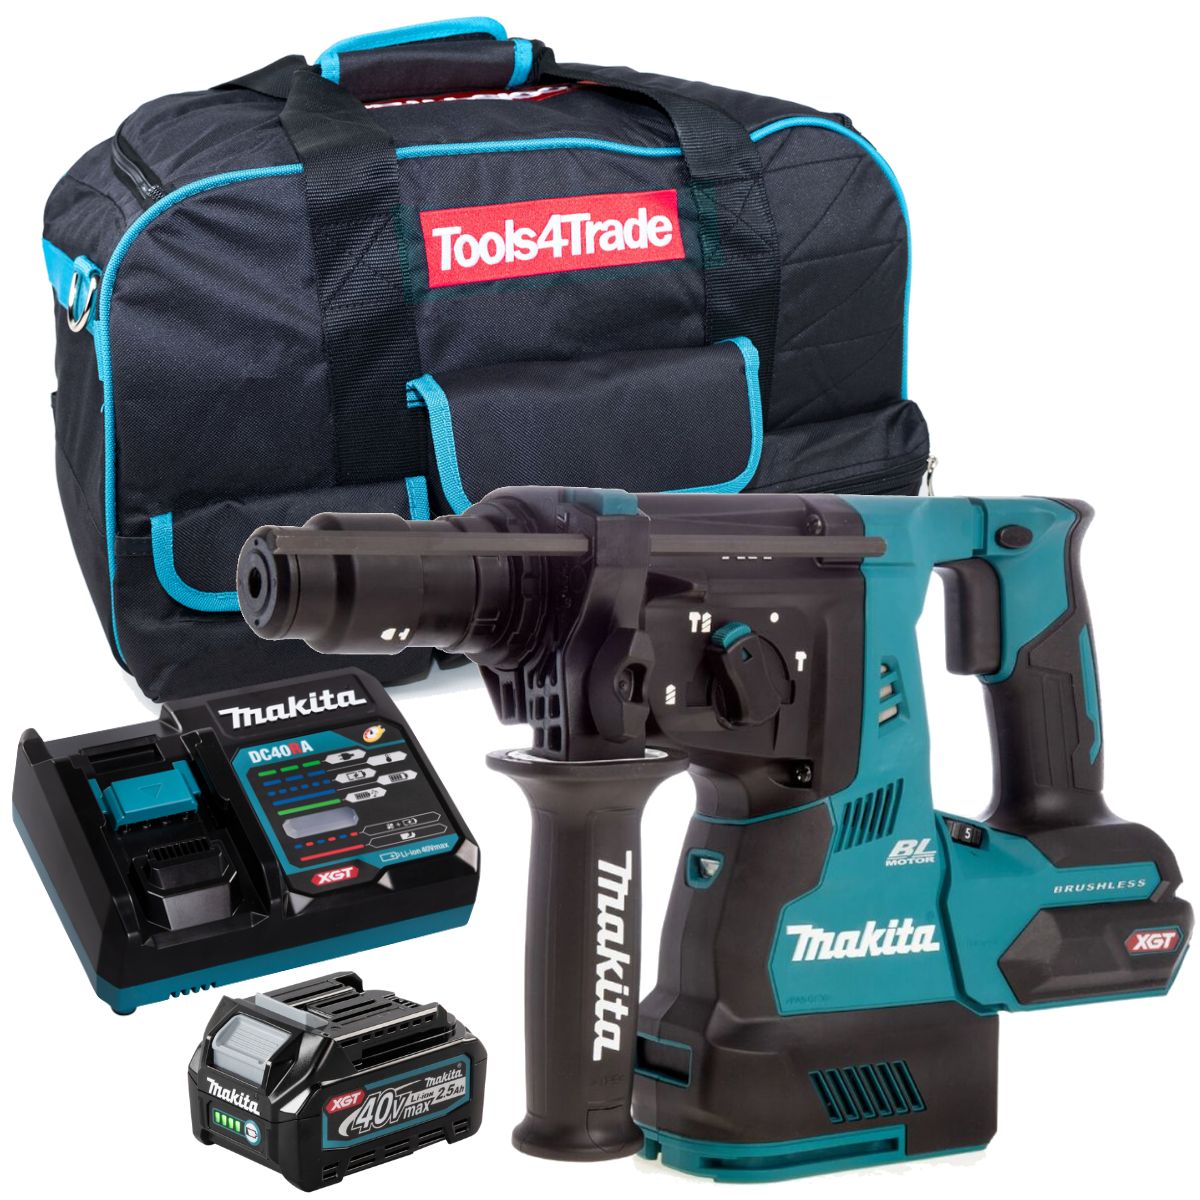 Makita HR003GZ 40V Brushless SDS+ Rotary Hammer Drill with 1 x 2.5Ah Battery Charger & Bag